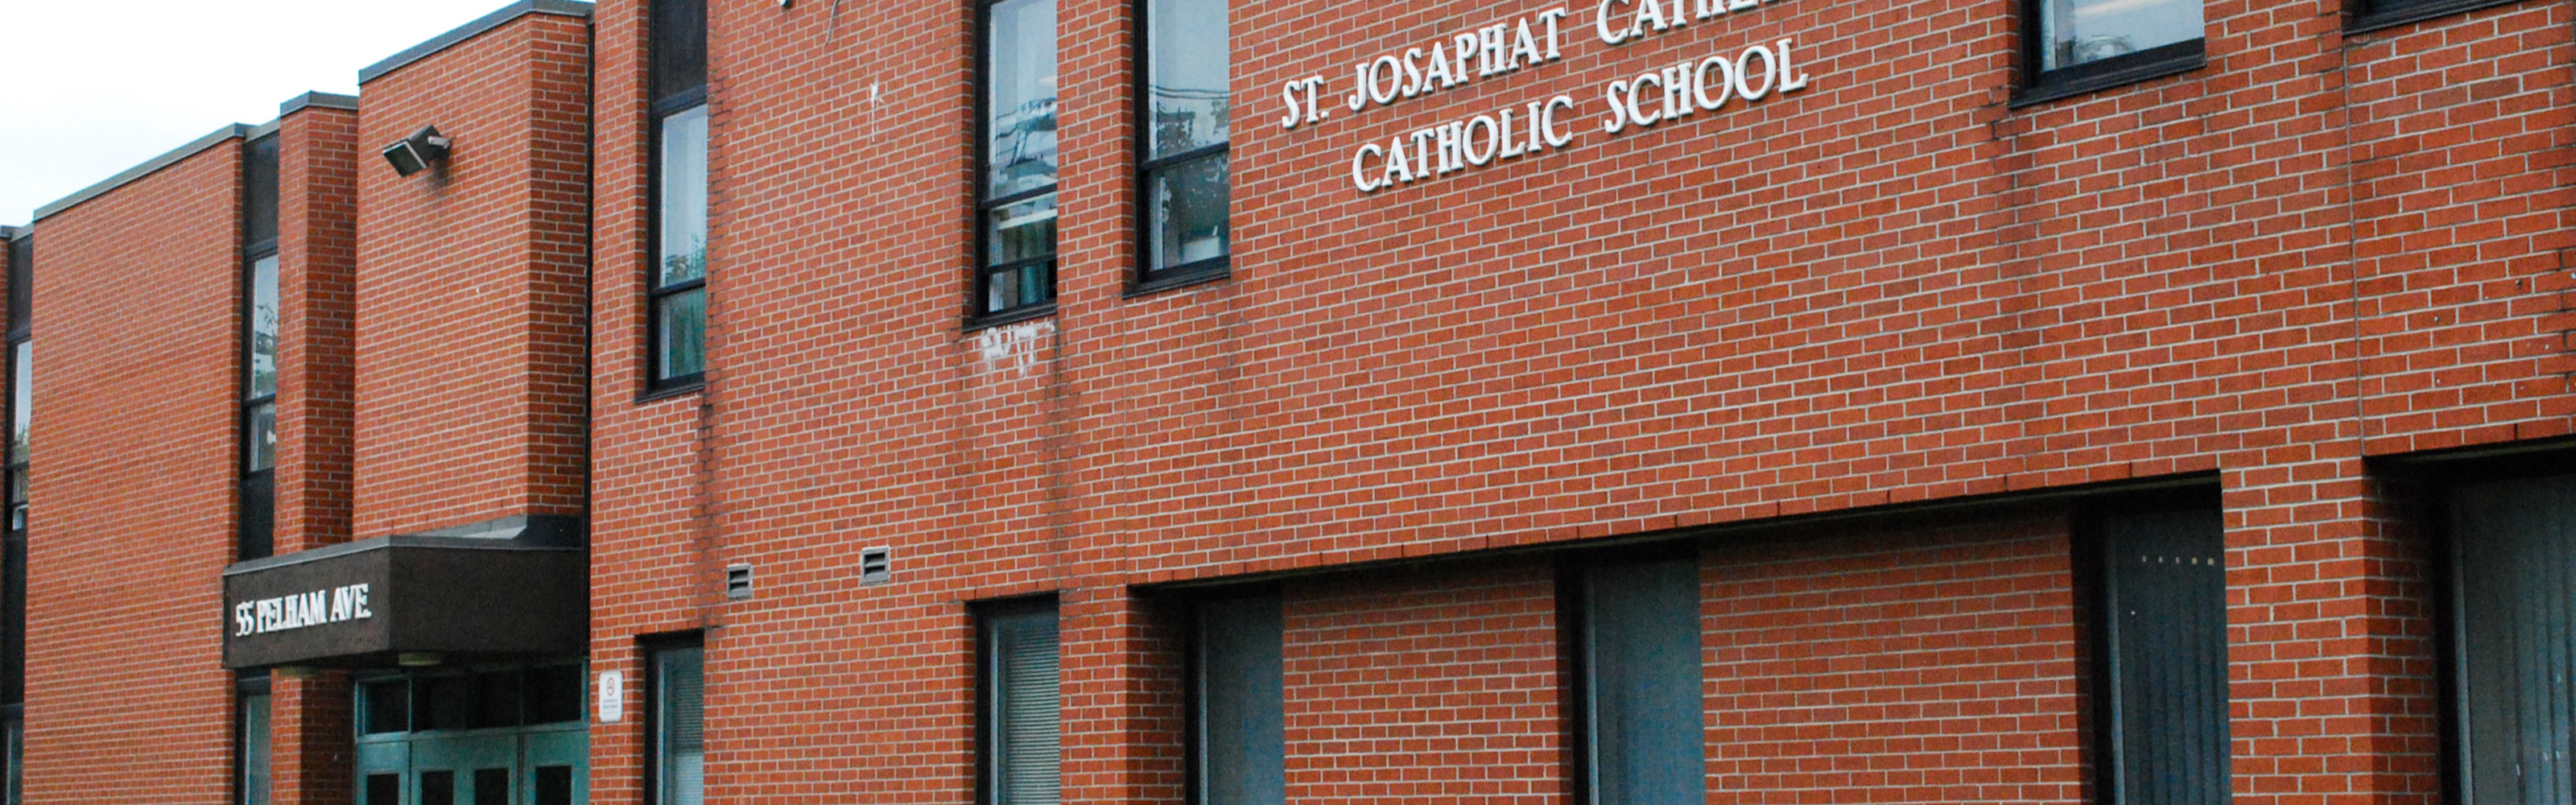 The front of the St. Josaphat Catholic School building.